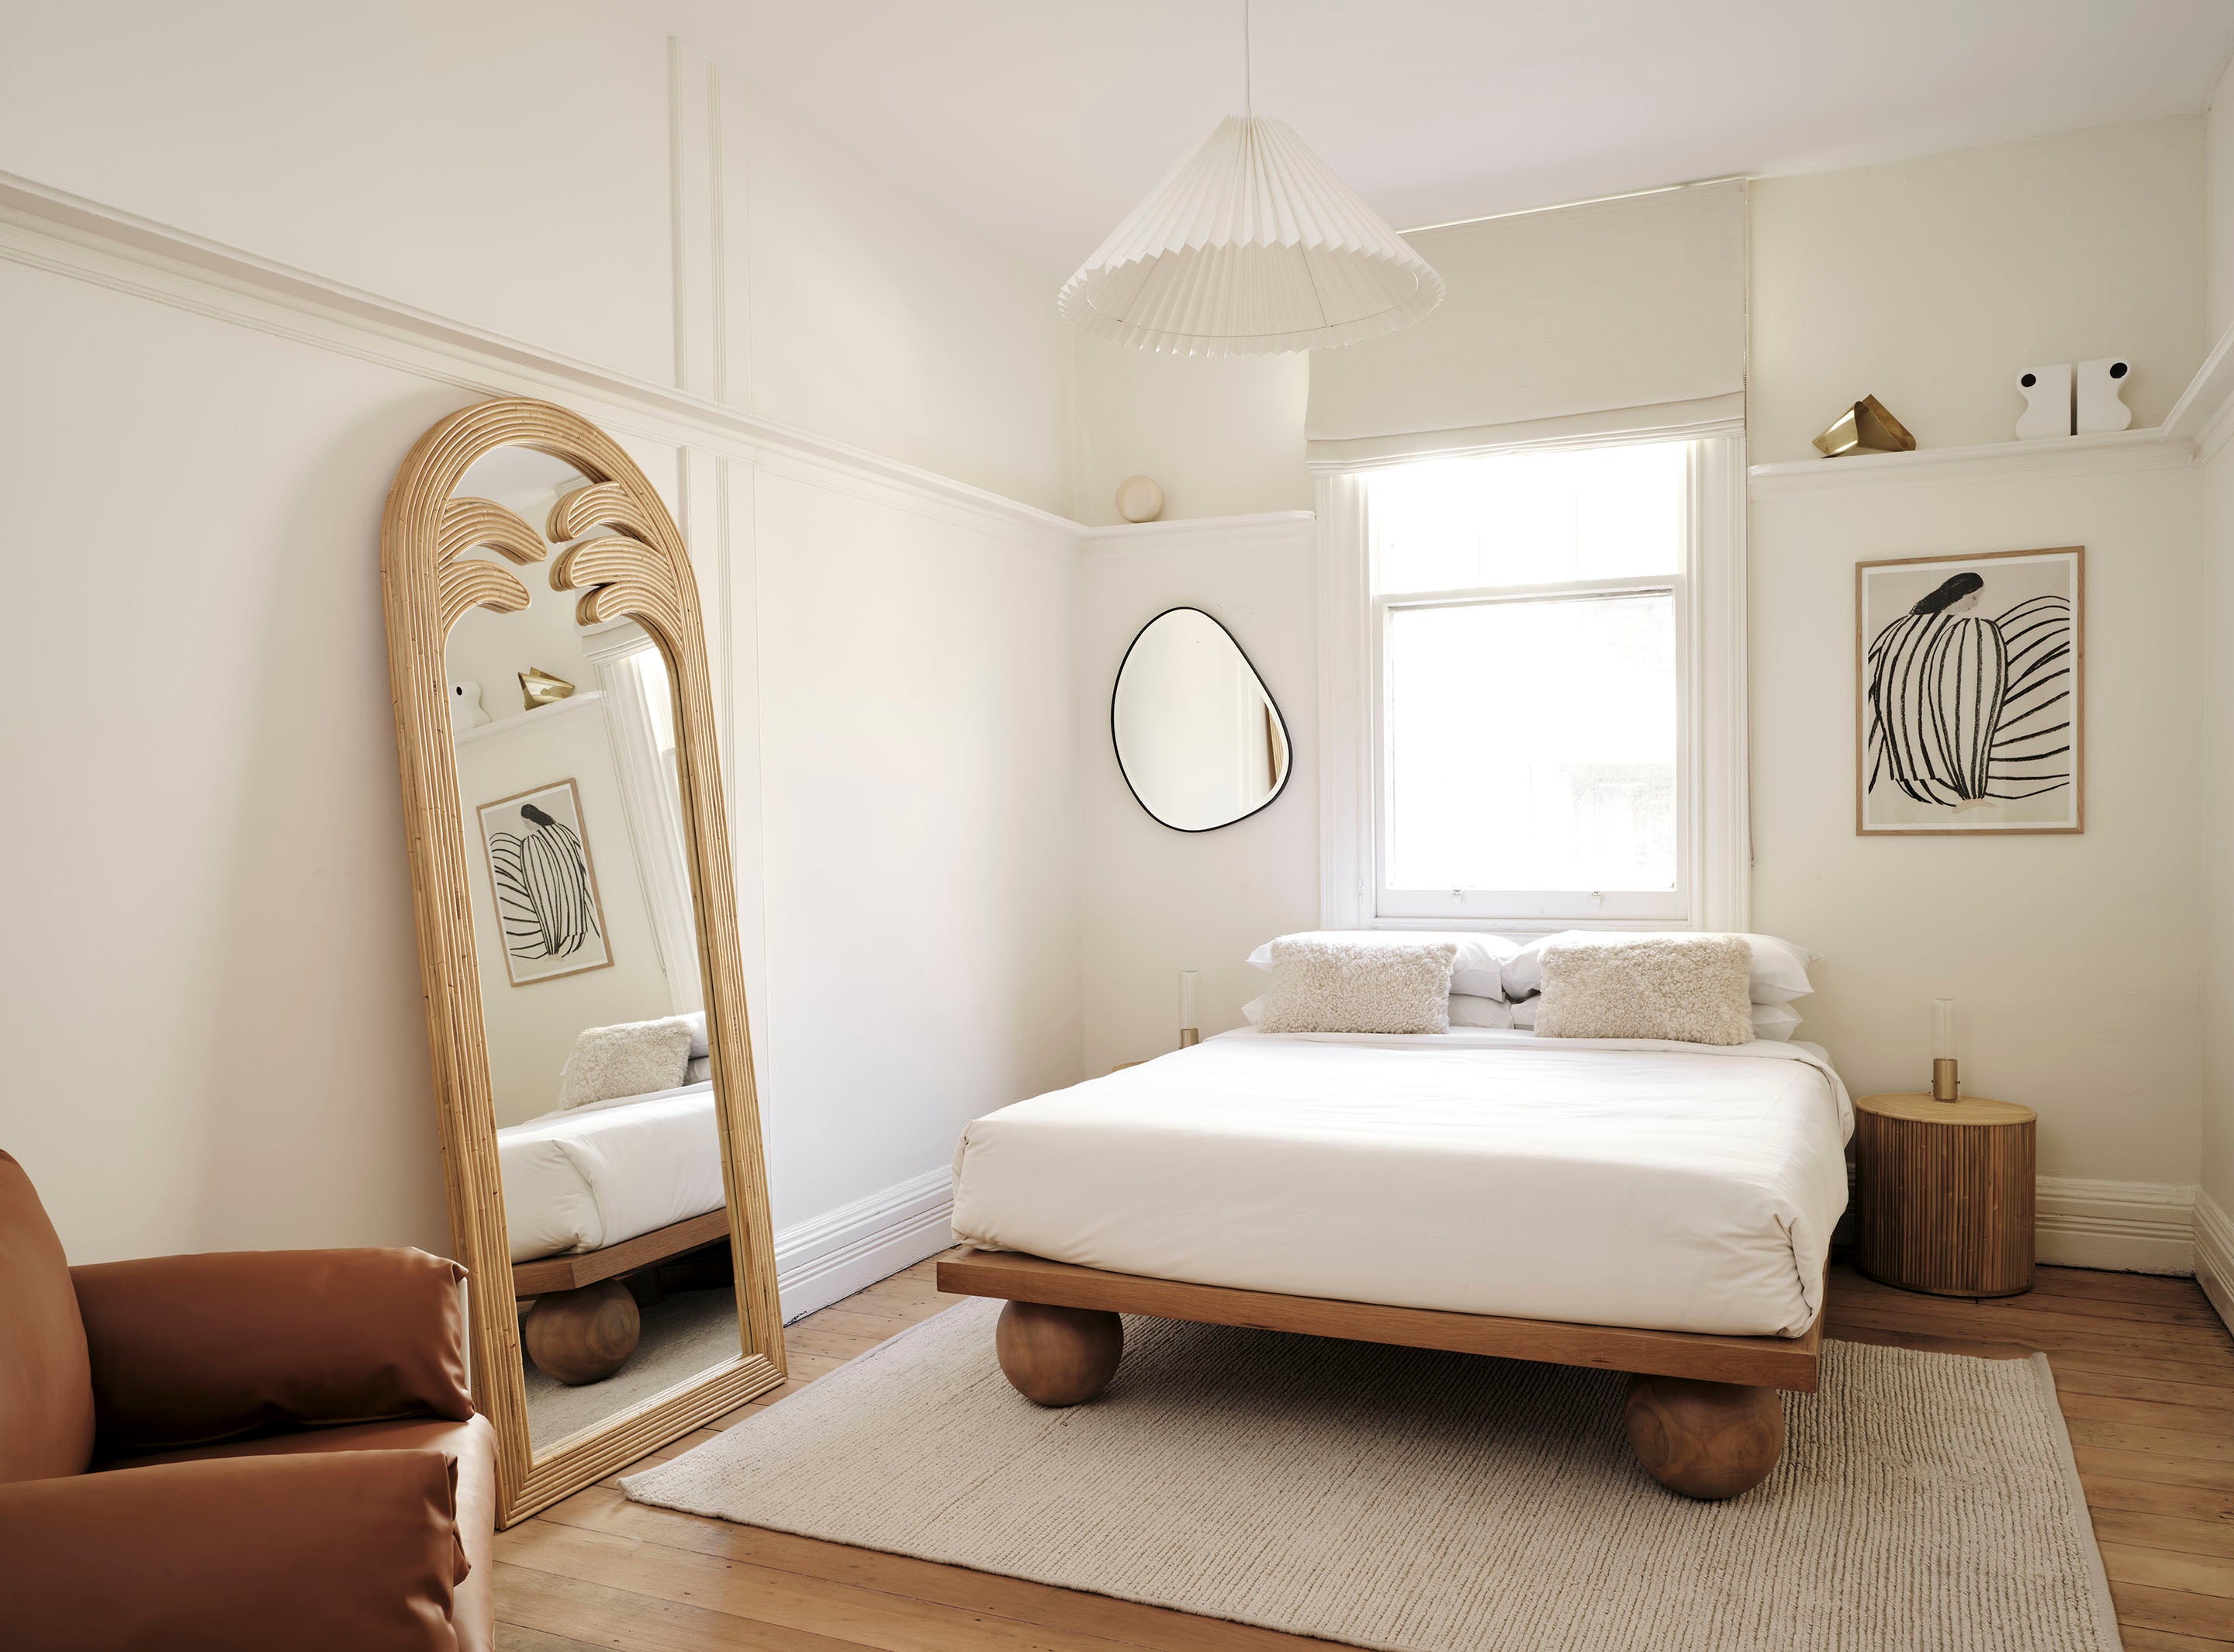 Sarah Ellison's Three Rooms apartment, featuring our Pebble Mirror, the Yoko Bed and the Gabriella Mirror